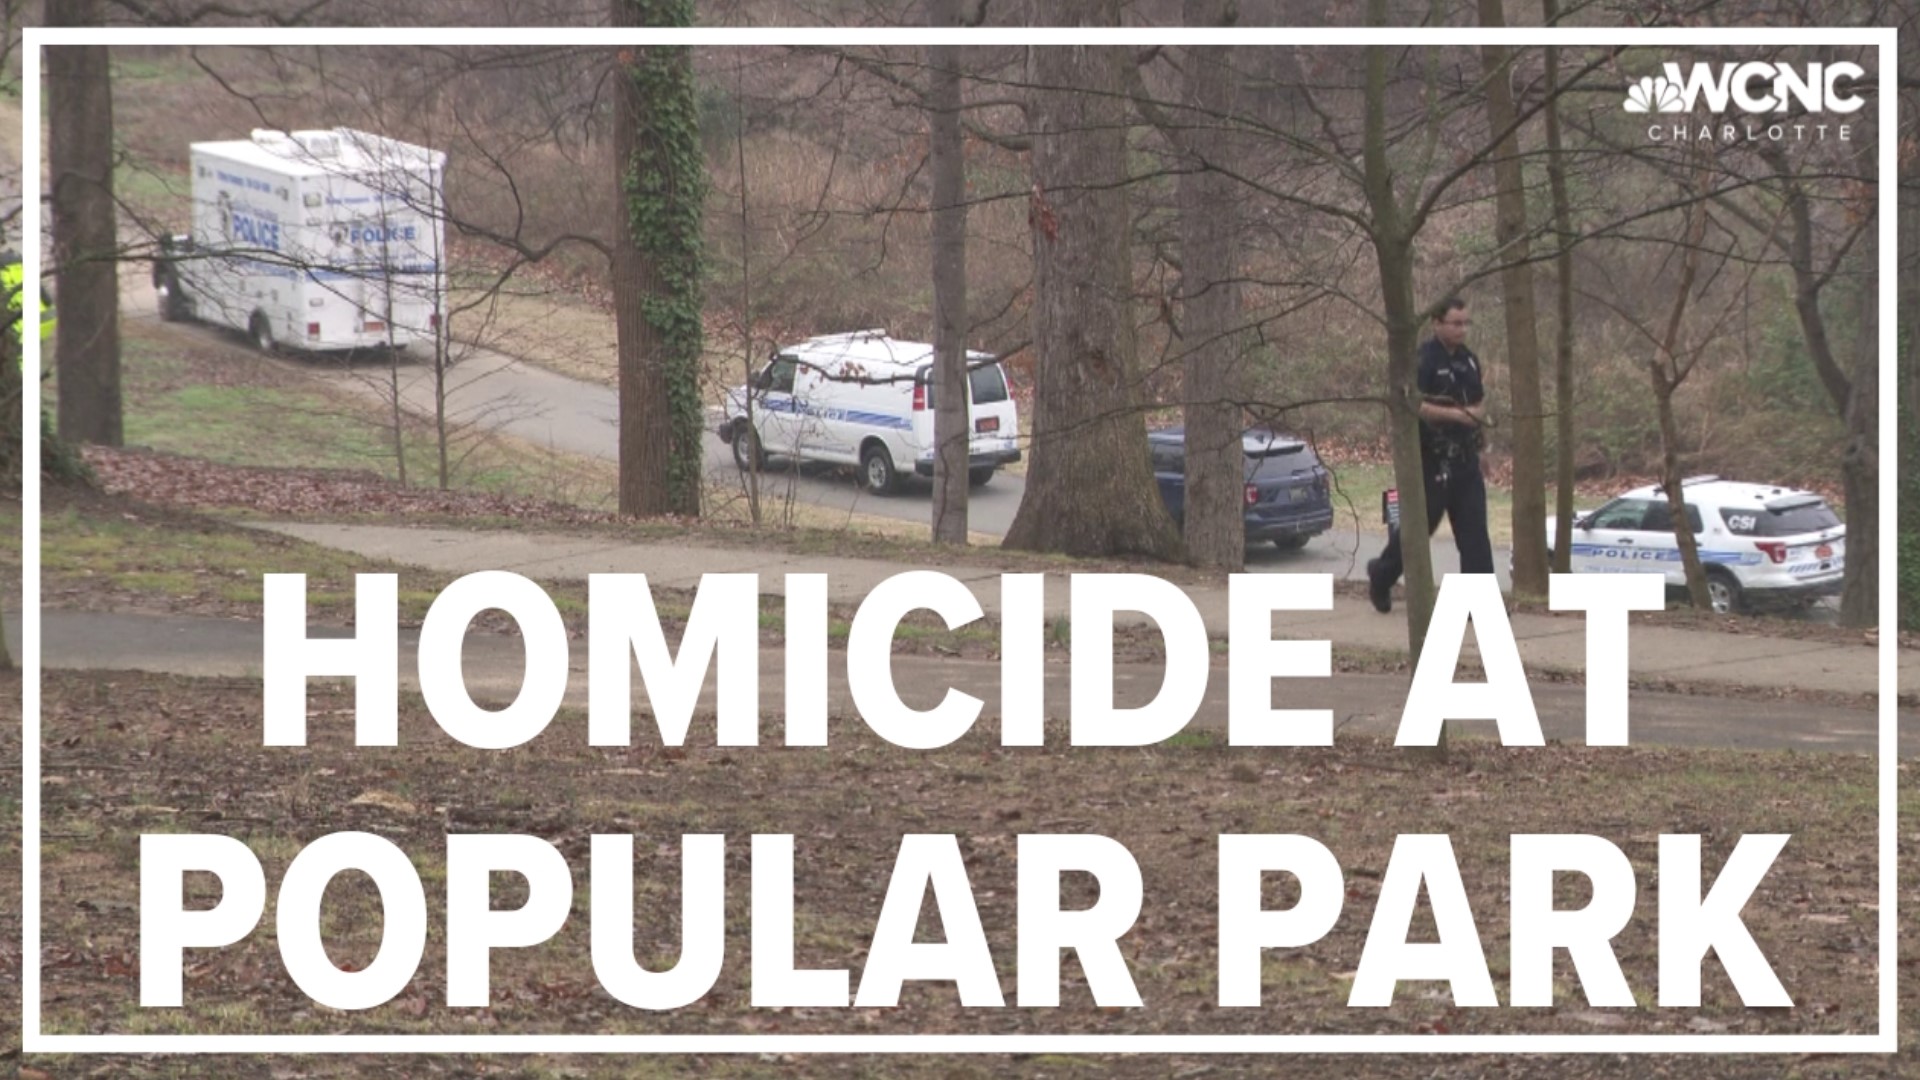 CMPD is investigating Charlotte's ninth homicide of 2023. A person was found shot dead in Cordelia Park.